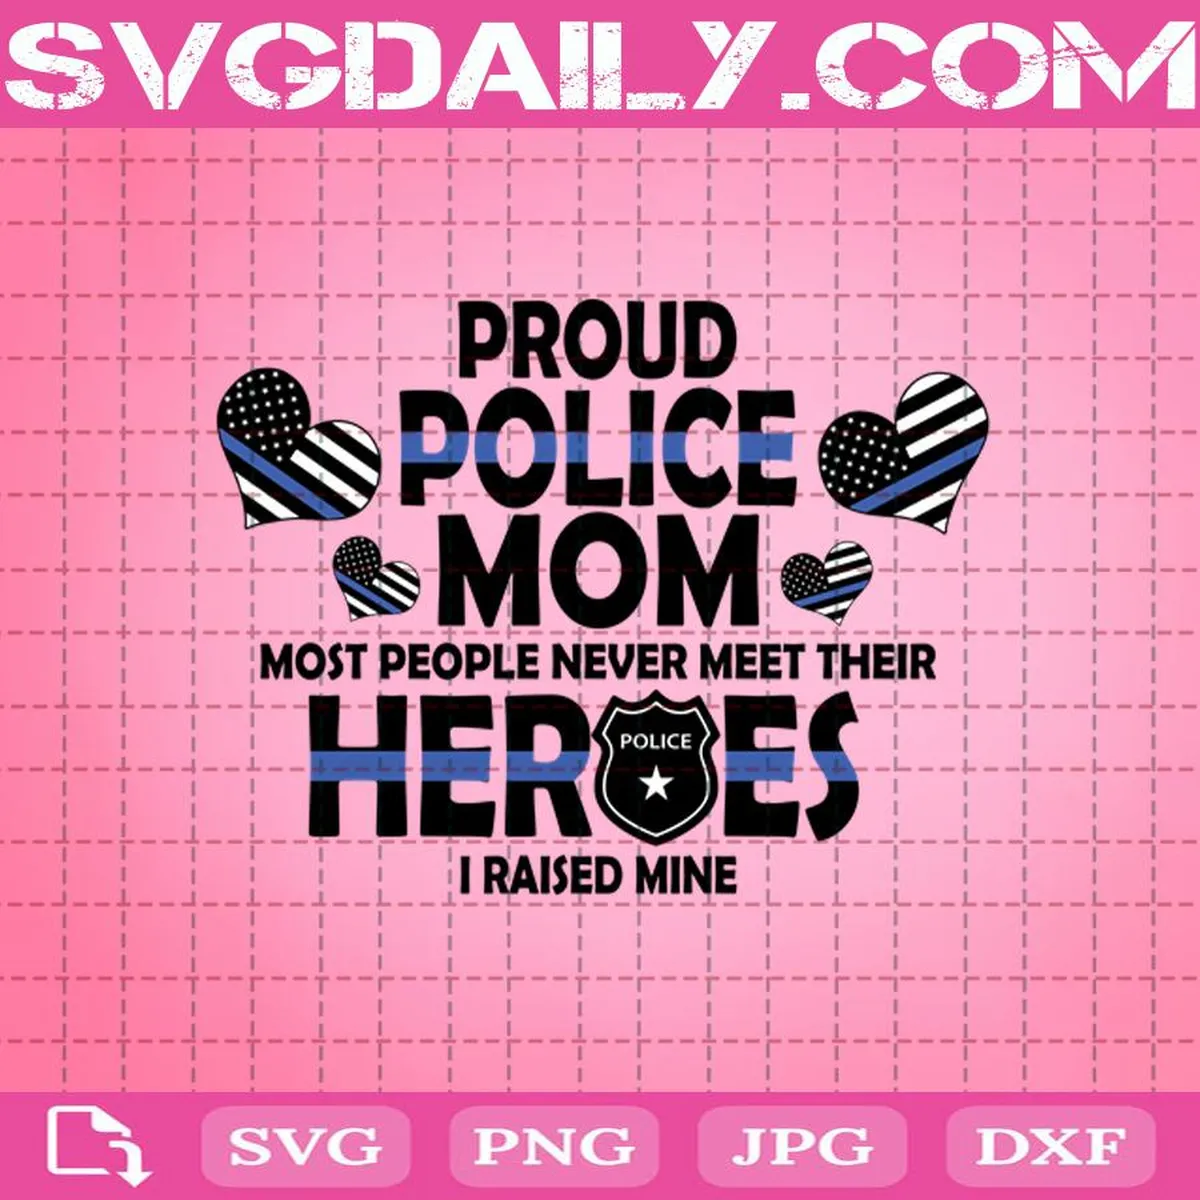 Proud Police Mom Most People Never Meet Their Heroes I Reiseed Mine Svg, Police Mom Svg, Police Svg, Heroes Svg